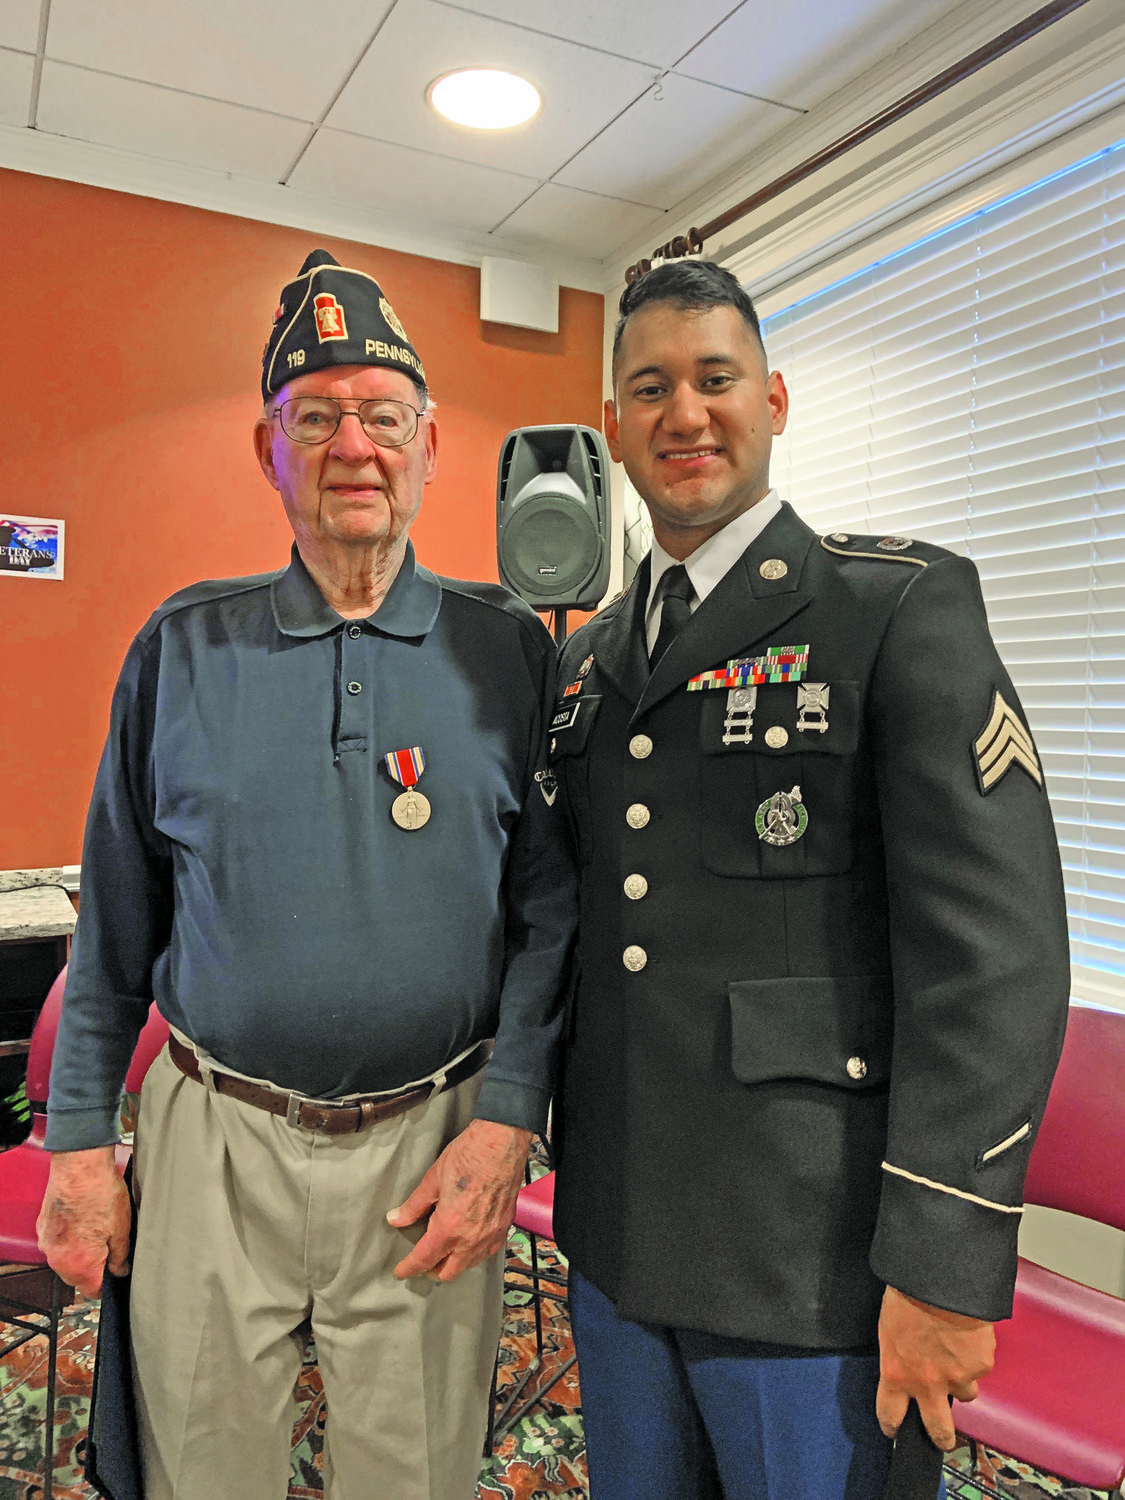 WWII veteran and resident of The Manor at York Town Art Wimmell and U.S. Army Sgt. Allen Acosta.